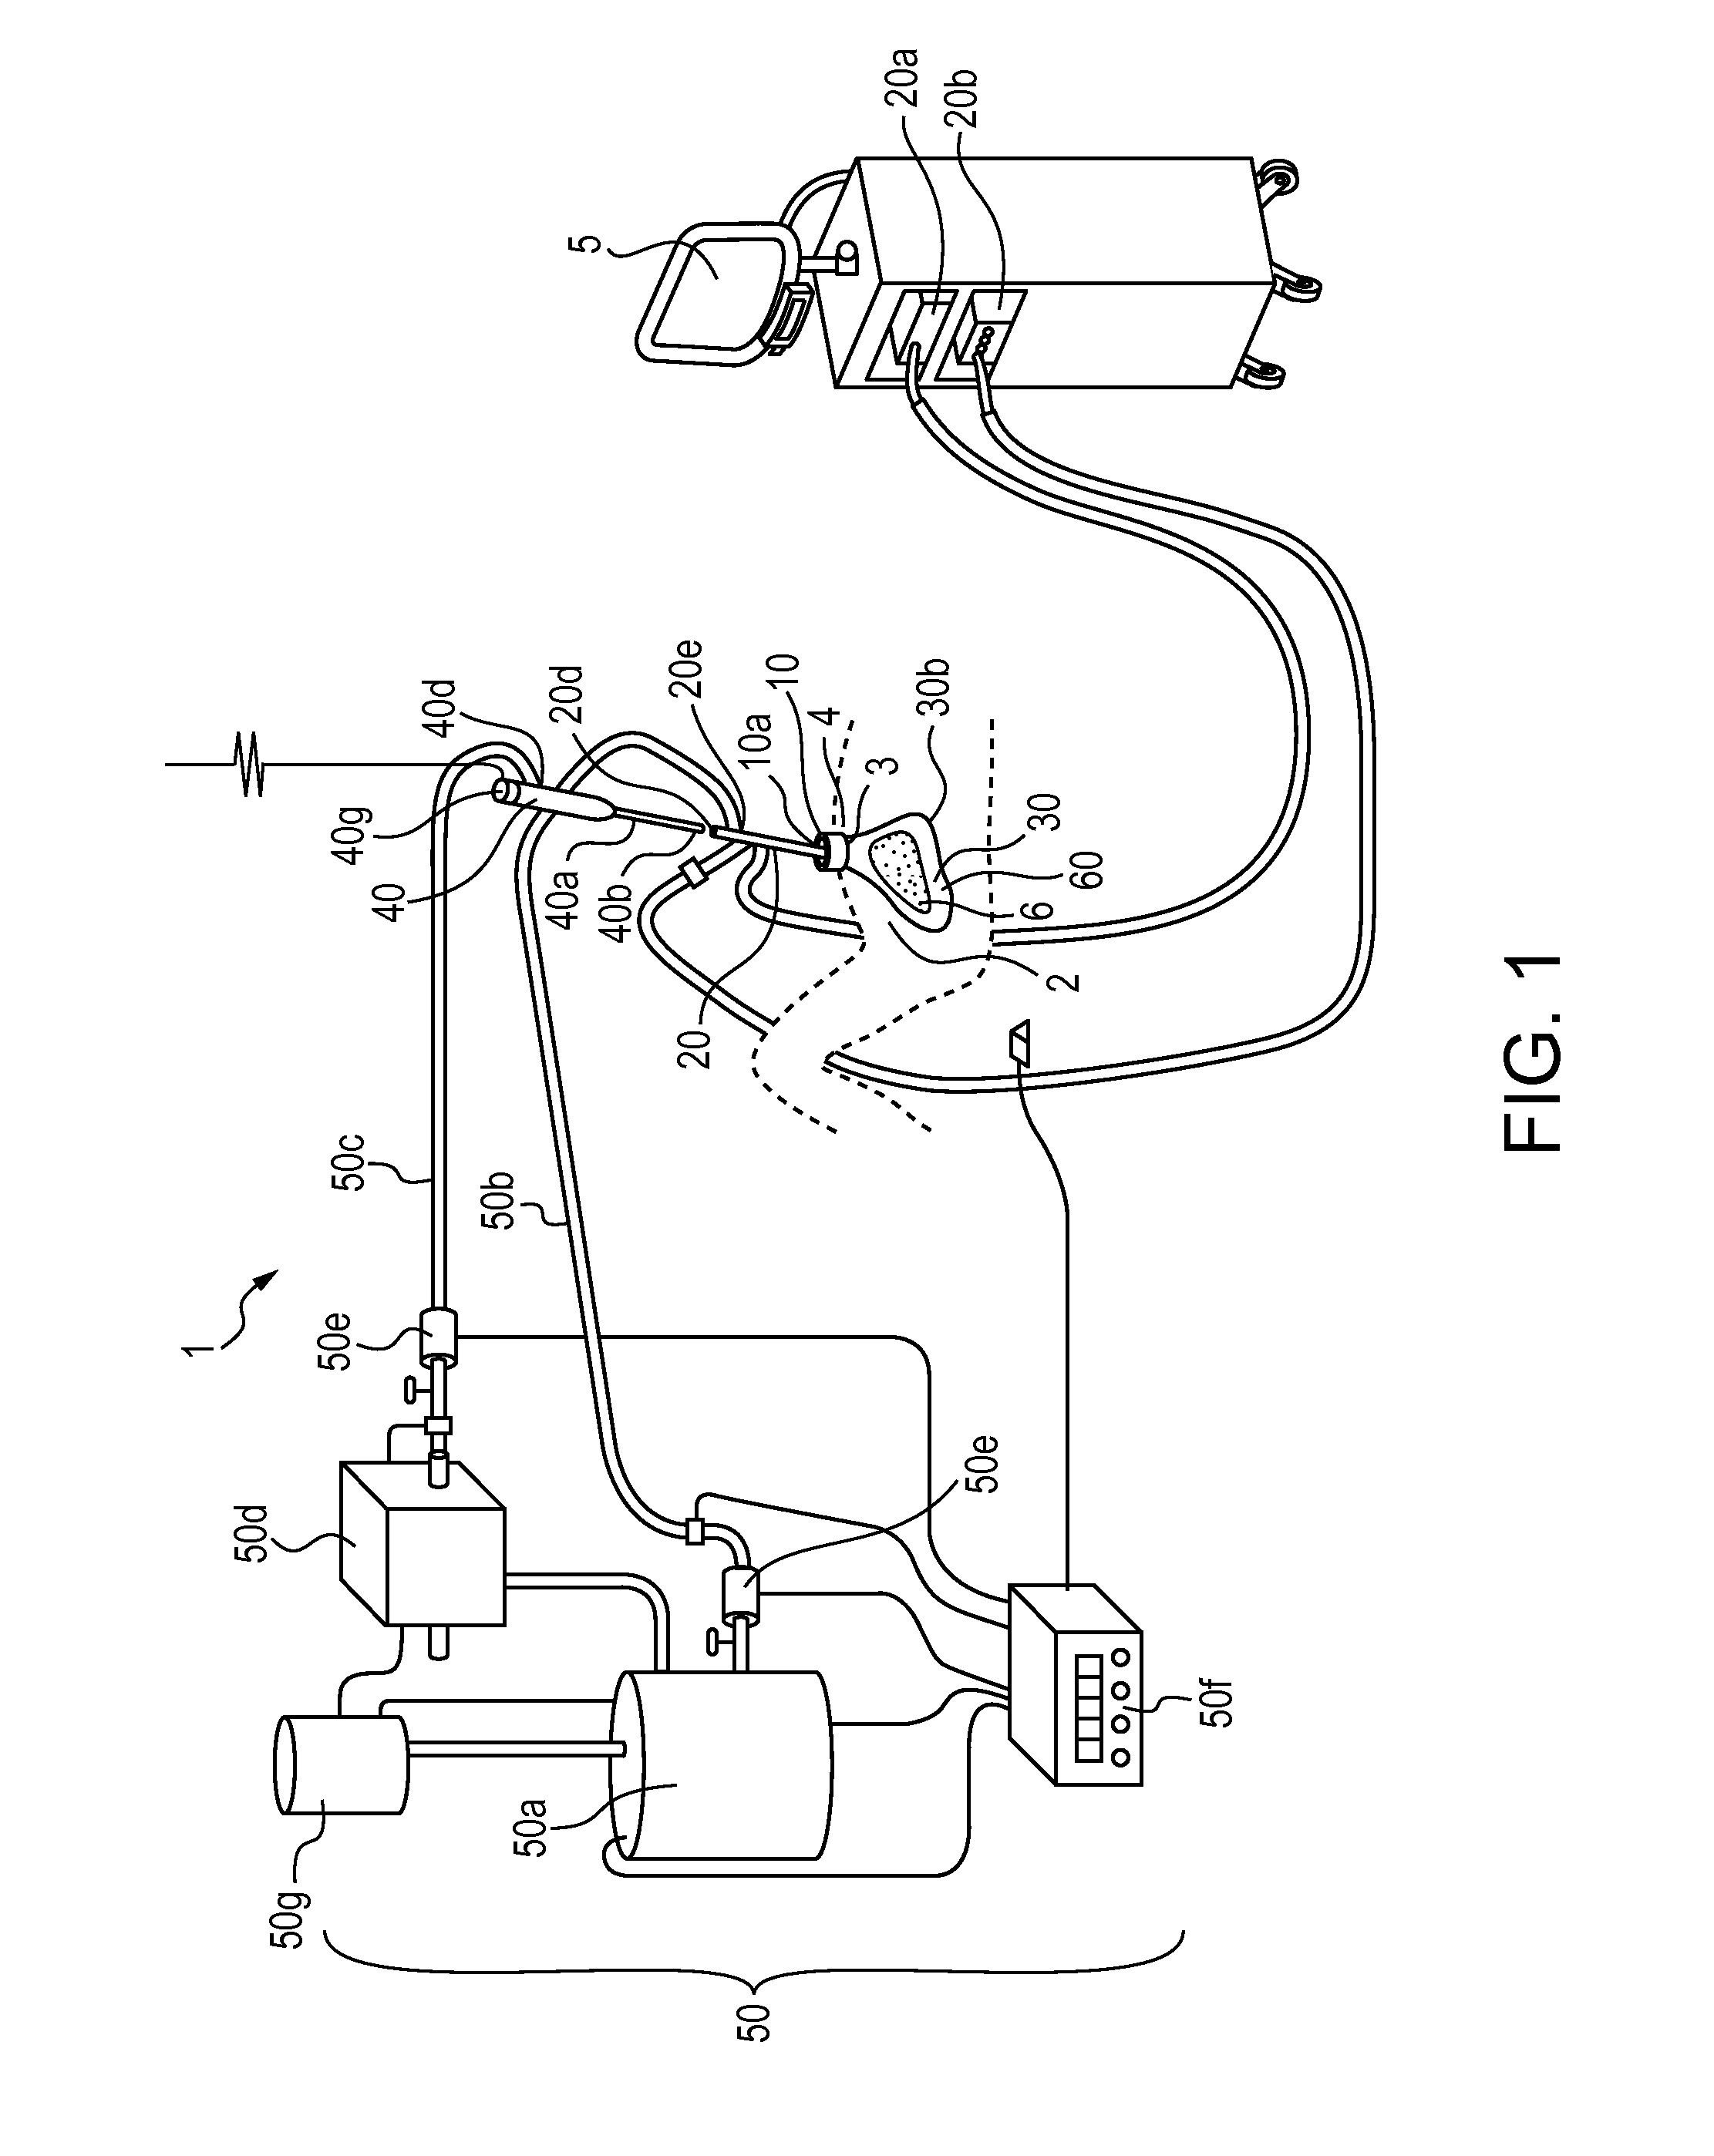 Methods and Devices for Removing Tissue During a Female Patient's Laparoscopic Surgery